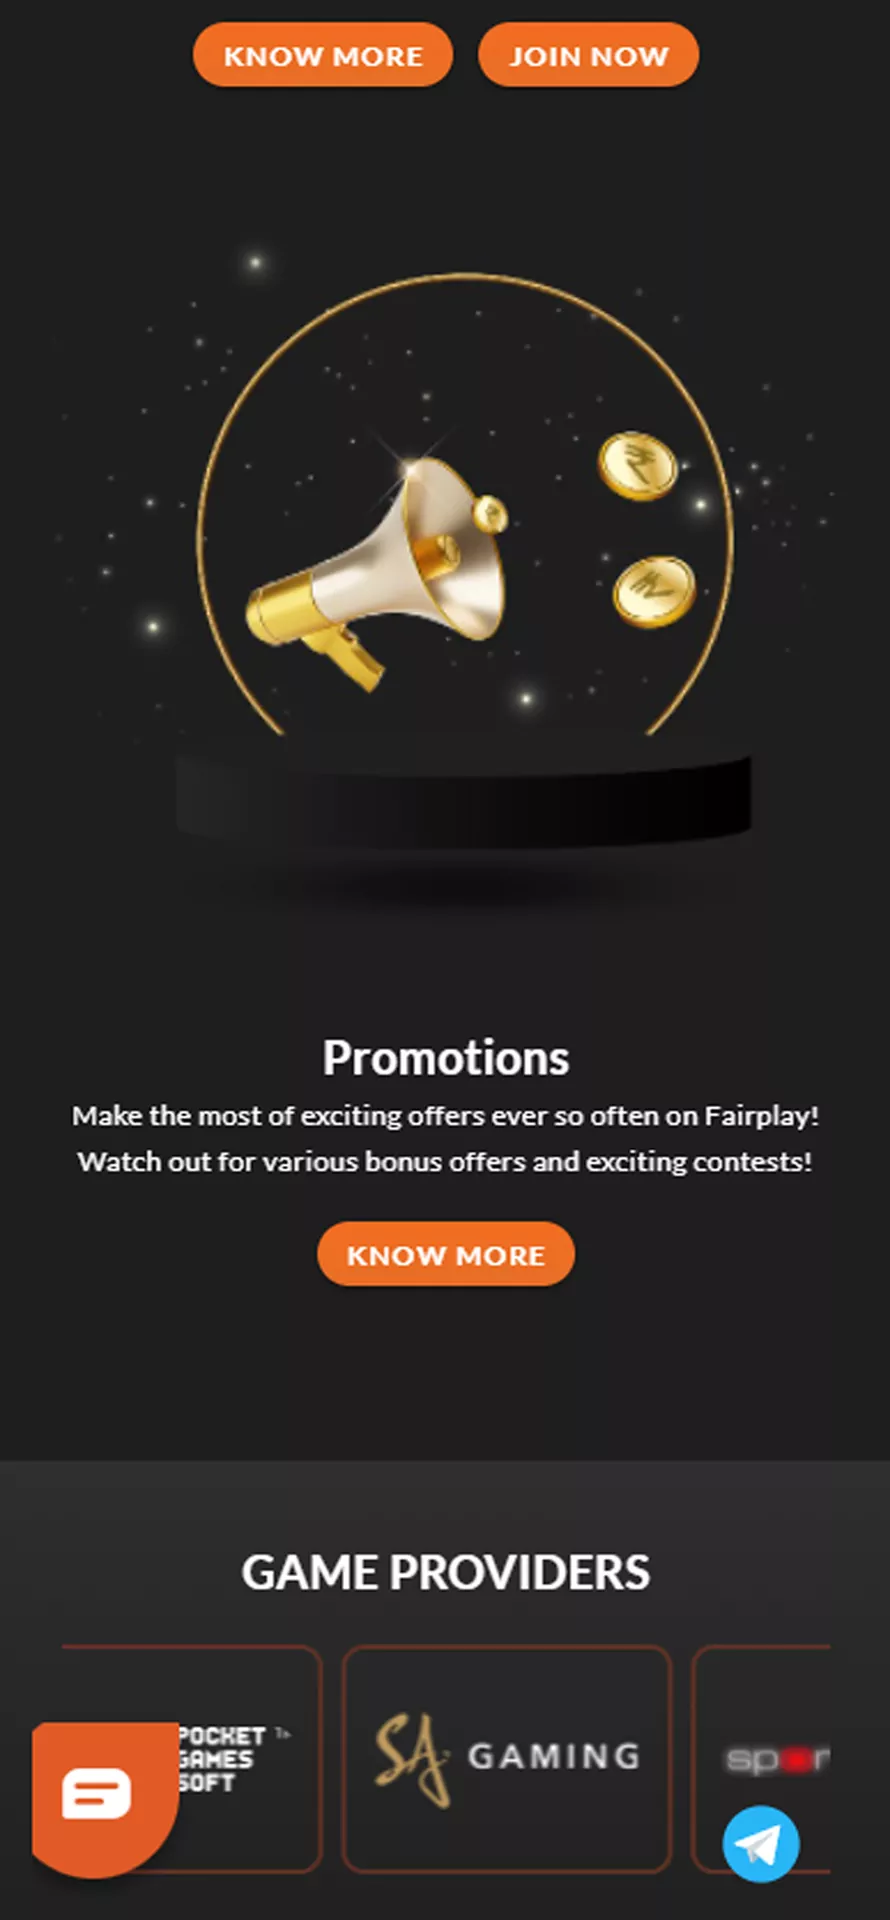 Enable notifications for Fairplay promotions.